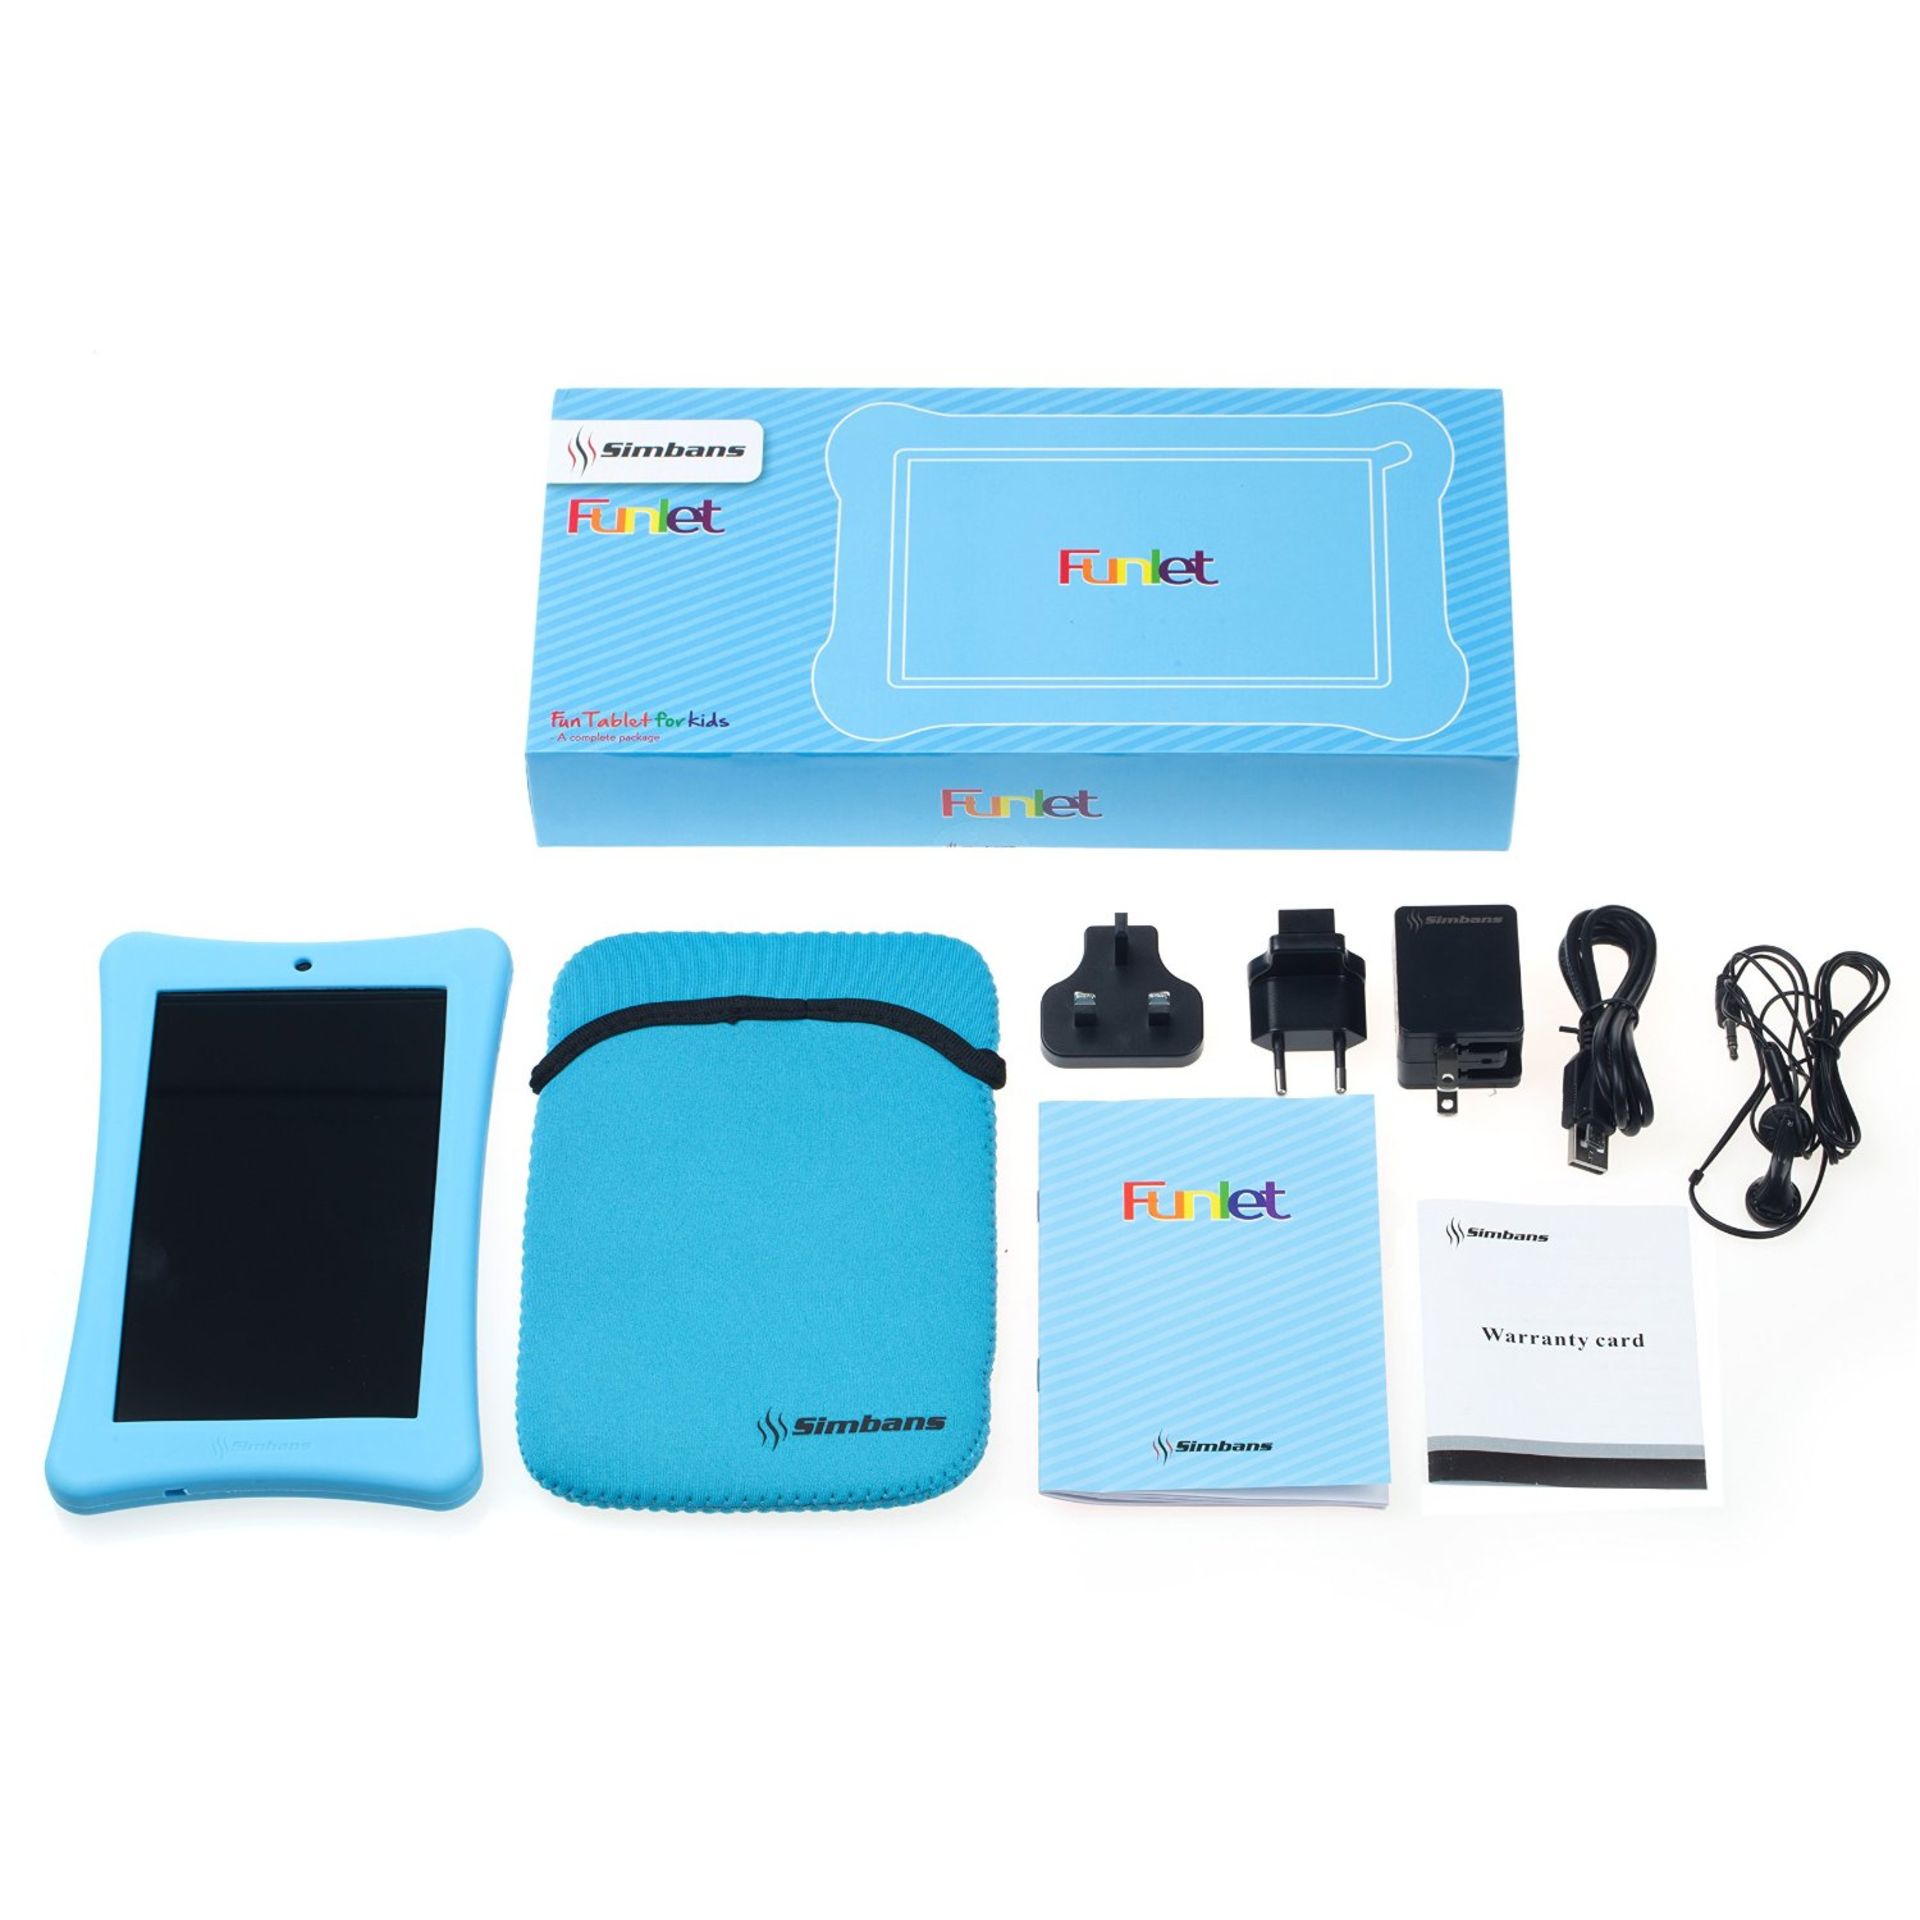 V *TRADE QTY* Brand New Funlet Blue 7 inch Tablet with Protective Case - Tablet sleeve - IPS - Image 2 of 2